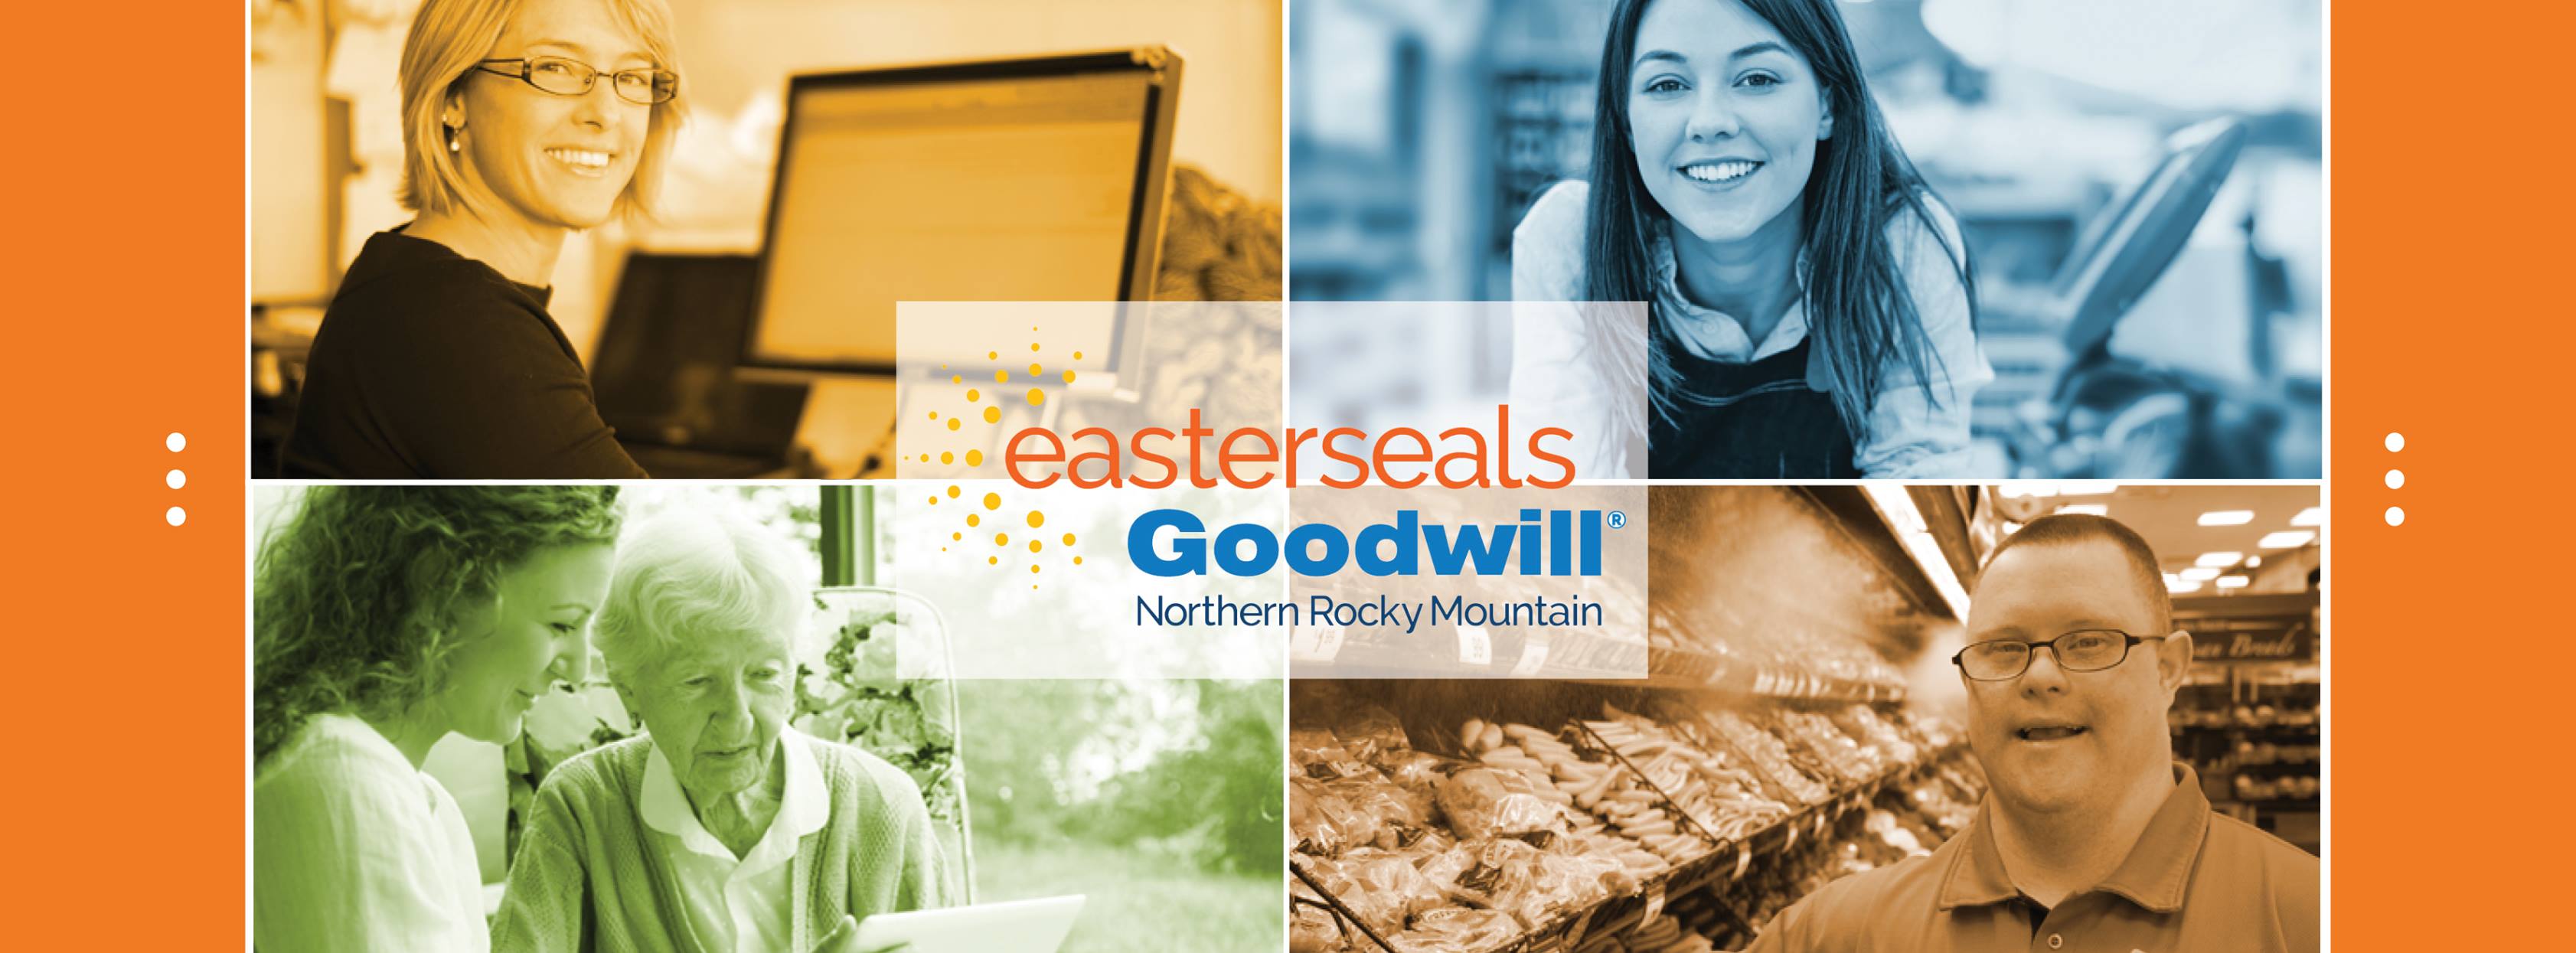 "easterseals Goodwill Northern Rocky Mountain" logo, transparent box over 4 photos; yellow tinted smiling woman at computer in upper left; green tinted woman helping older woman in lower left; blue tinted smiling girl in upper right; orange tinted smiling man in grocery store in lower right; orange side panels with three white dots